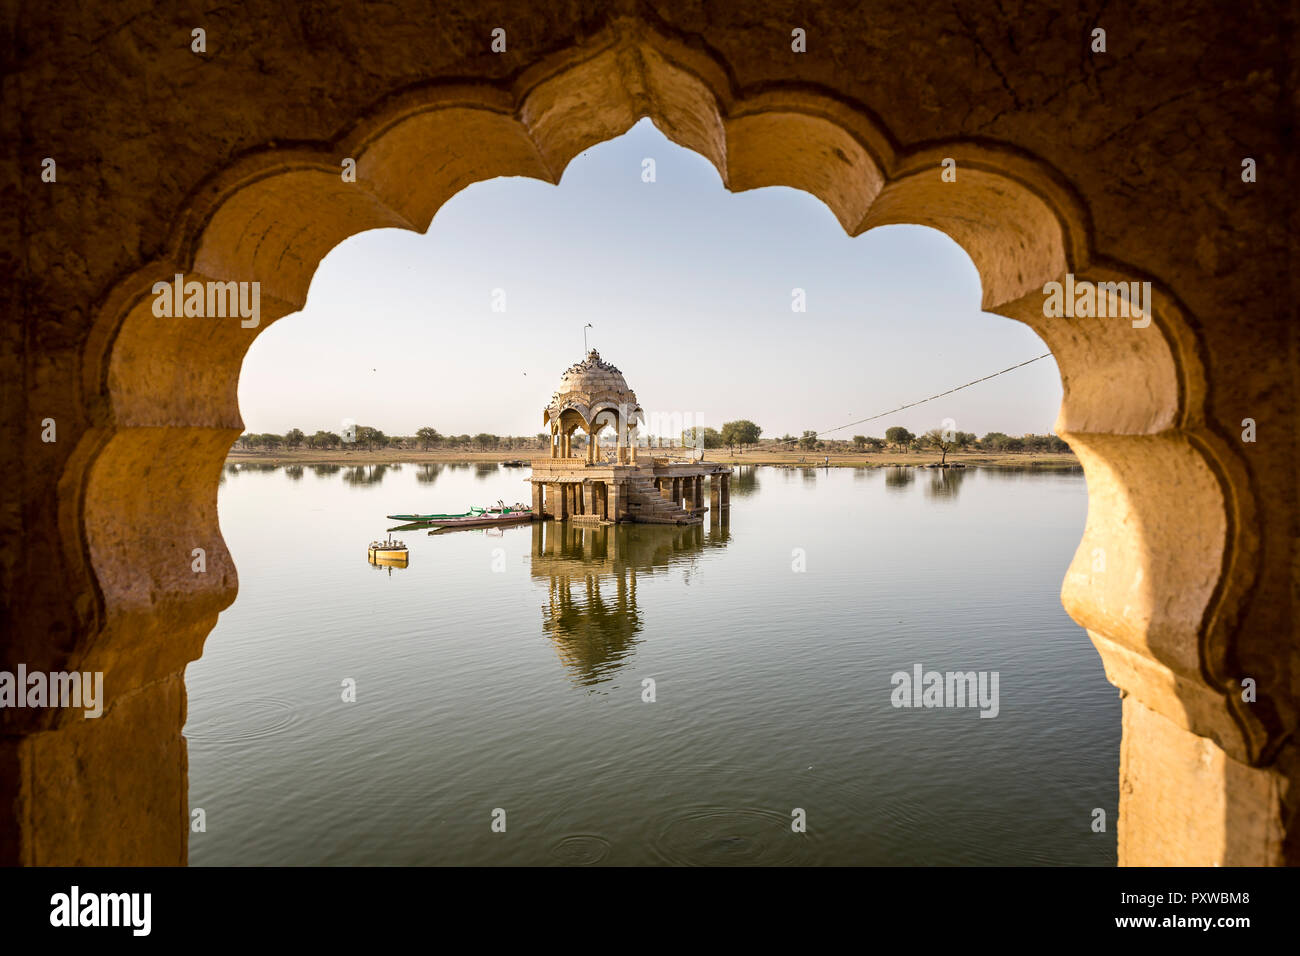 View of Gadisar lake from inside the Chhatri, in the desert town of Jaisalmer in India Stock Photo